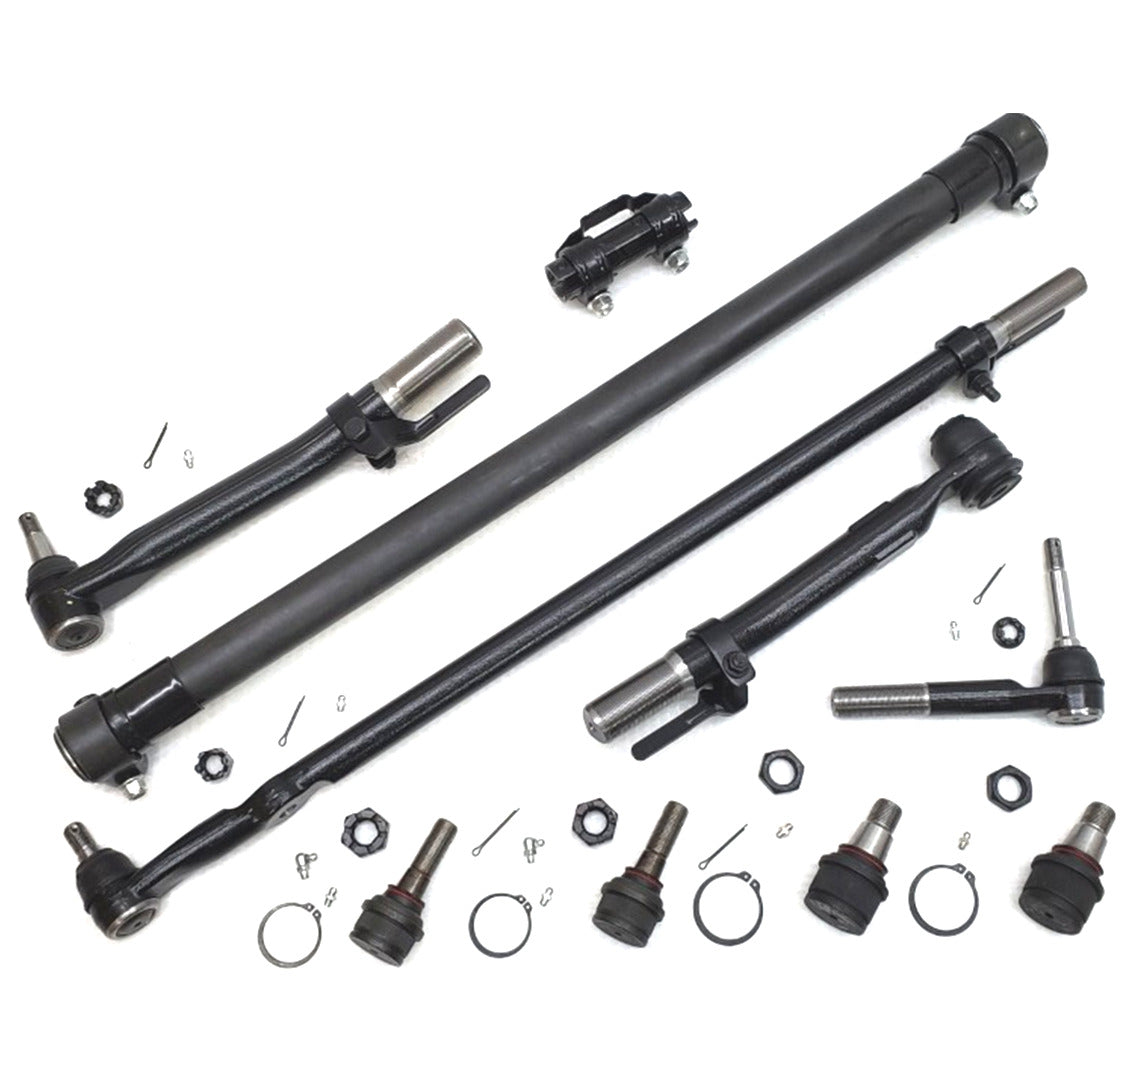 HD Ball Joint Tie Rod Sleeve Steering Kit for 2005-2007 Ford F250, F350 Super Duty 4x4